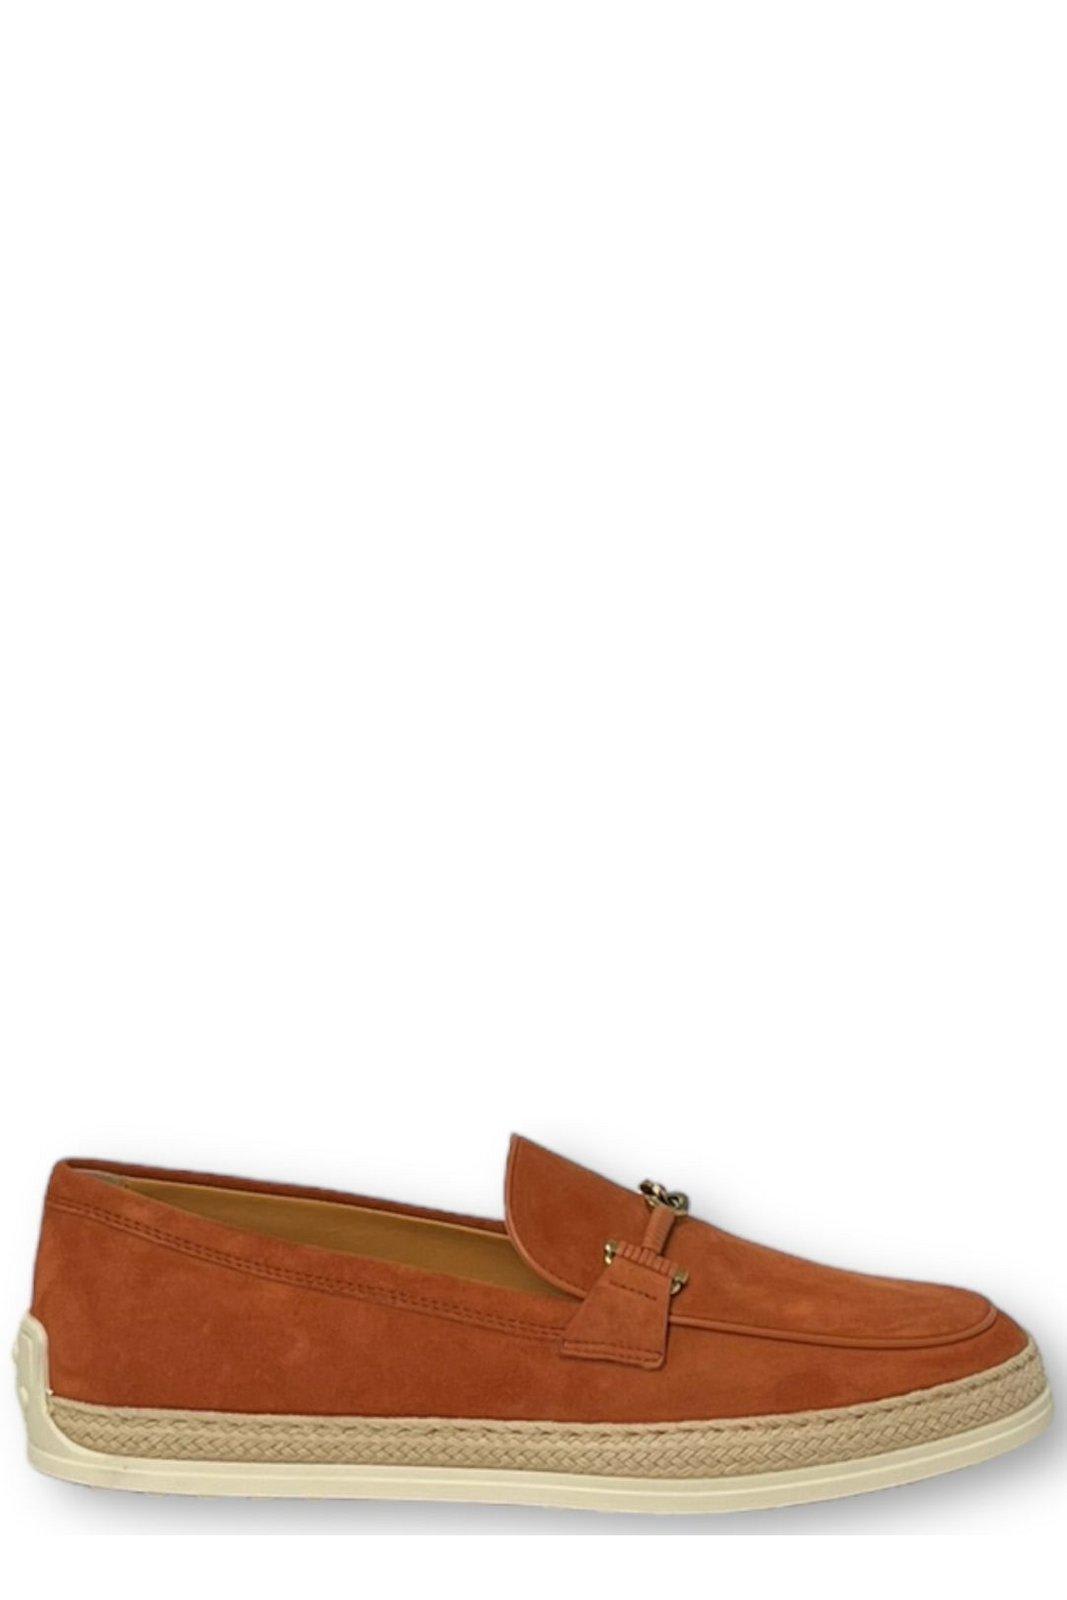 TOD'S GOMMA SLIP-ON LOAFERS TODS